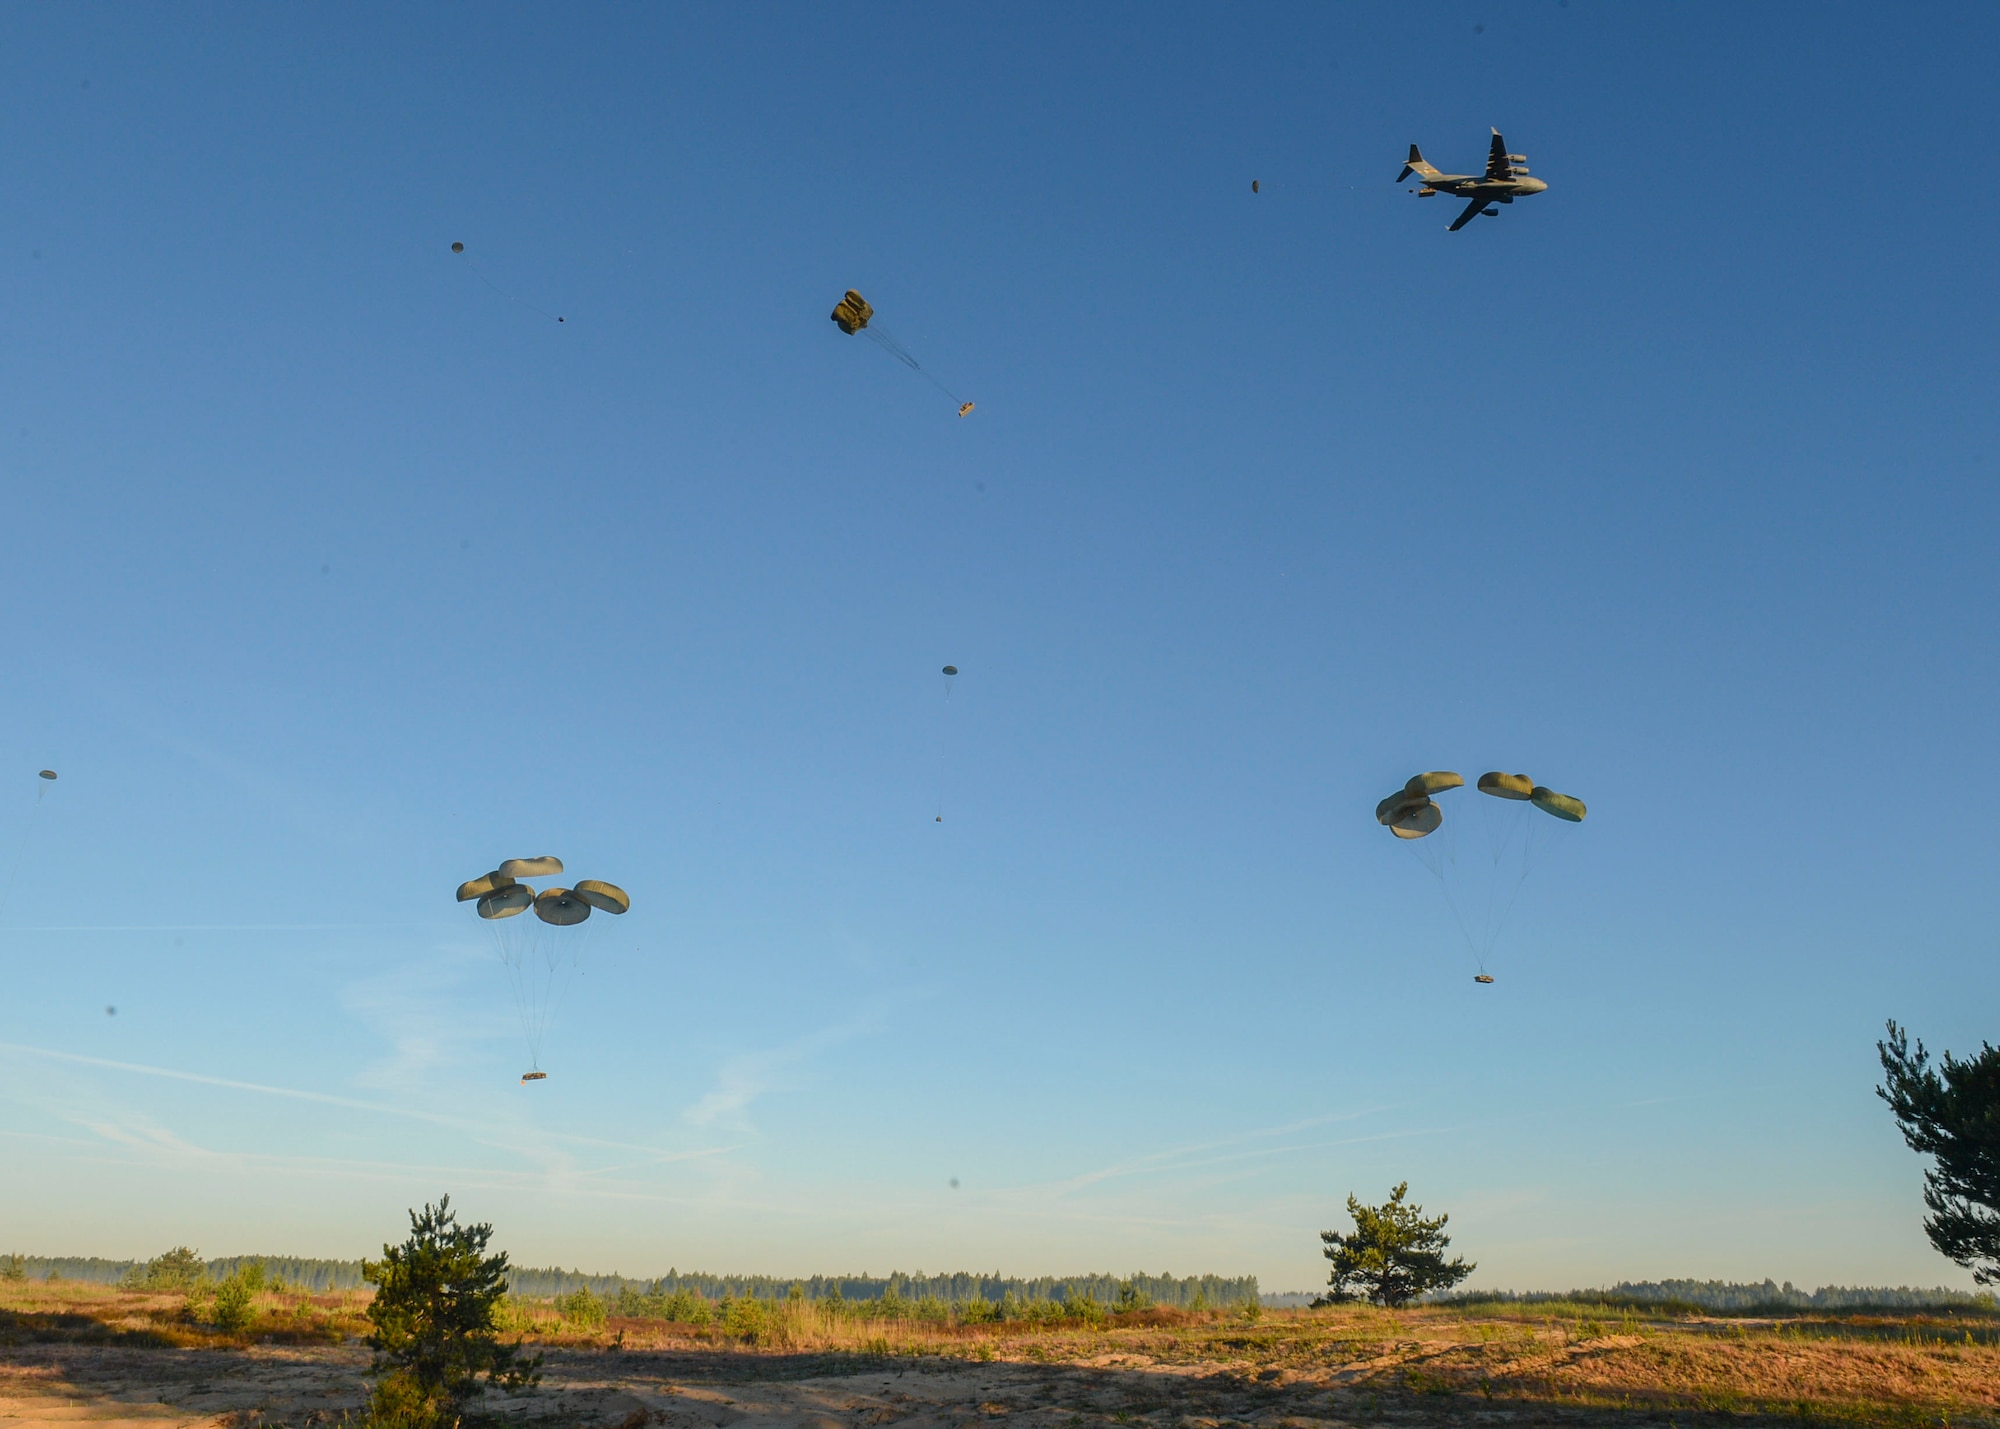 A U.S. Air Force C-17 Globemaster drops supplies over a drop zone in Adazi, Latvia, June 9, 2018. Four aircraft from the 62nd Airlift Wing at Joint Base Lewis-McChord, Washington and four aircraft from the 437th Airlift Wing at Joint Base Charleston, South Carolina provided support to exercise Swift Response 18. Swift Response included approximately 2,300 participants from seven allied nations to help train the U.S. Global Response Force, led by the U.S. Army’s 82nd Airborne Division, in Joint Forcible Entry operations. (U.S. Air Force photo by Staff Sgt. Jimmie D. Pike)